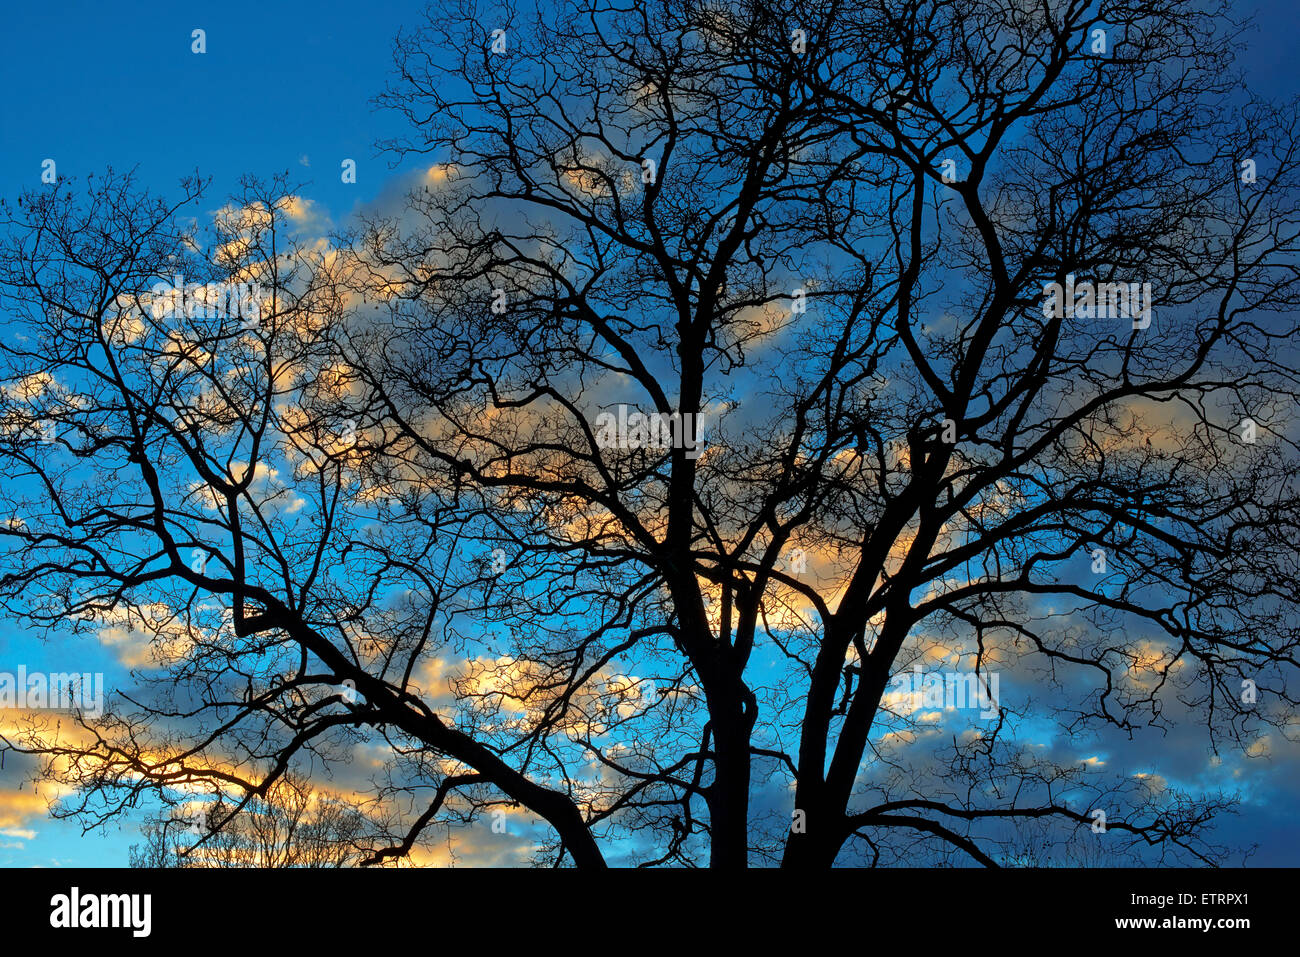 Sunset with trees, silhouette, Paris, France Stock Photo